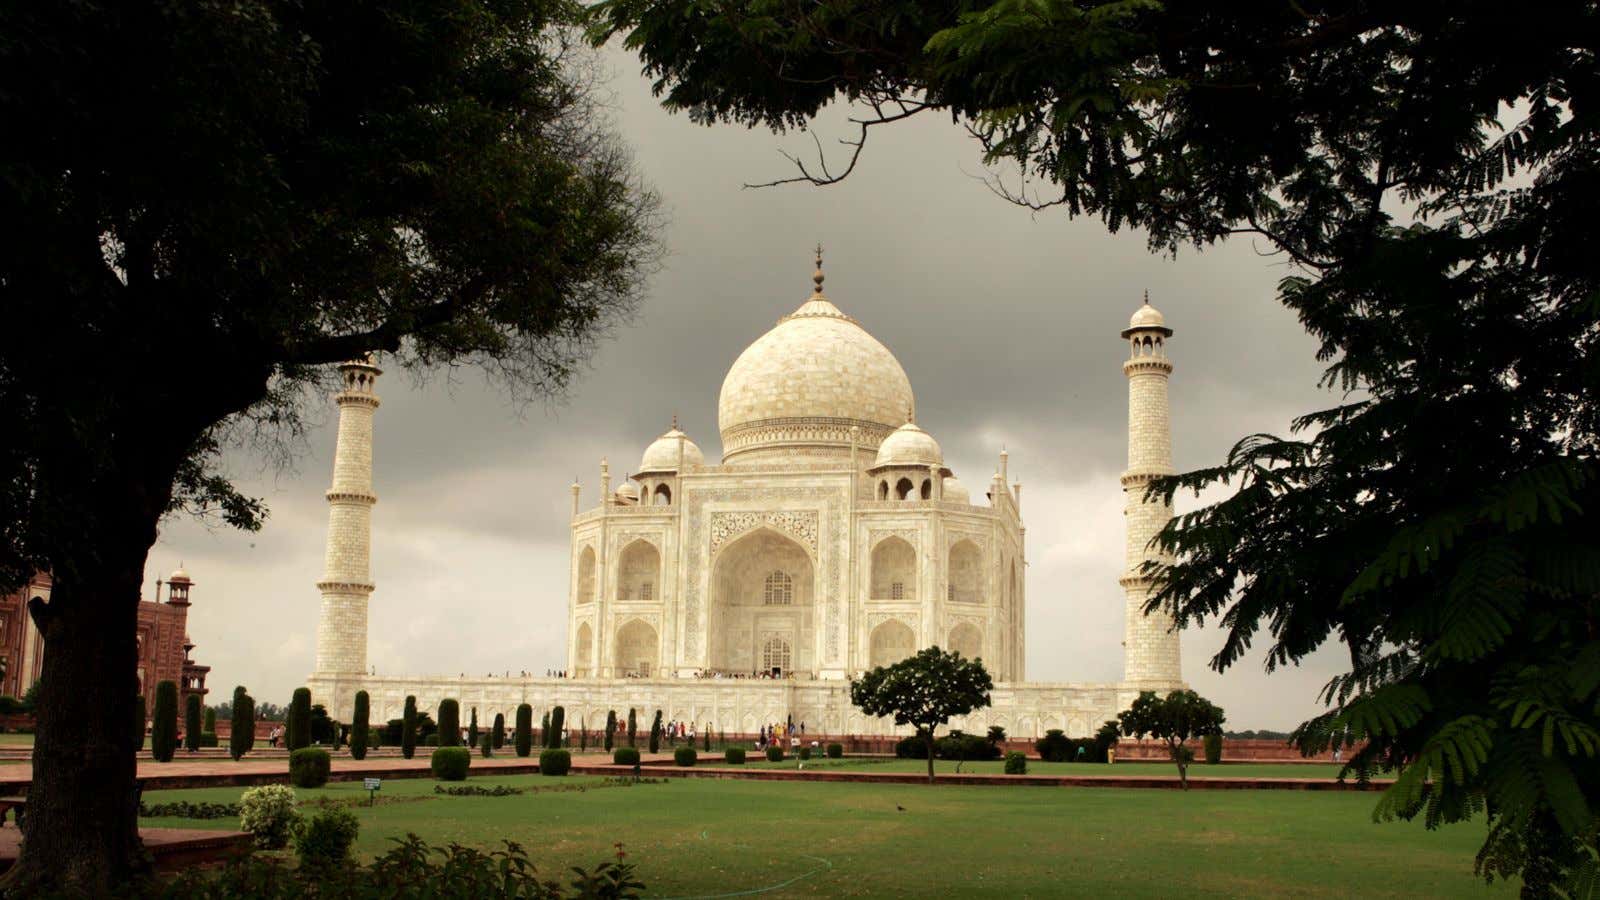 Tourists visit the Taj Mahal in the tourist city of Agra, September 16, 2004. India is preparing to celebrate the 350th anniversary of the Taj Mahal, the 17th century marble mausoleum built by Mughal emperor Shah Jahan for his wife, later in the month.